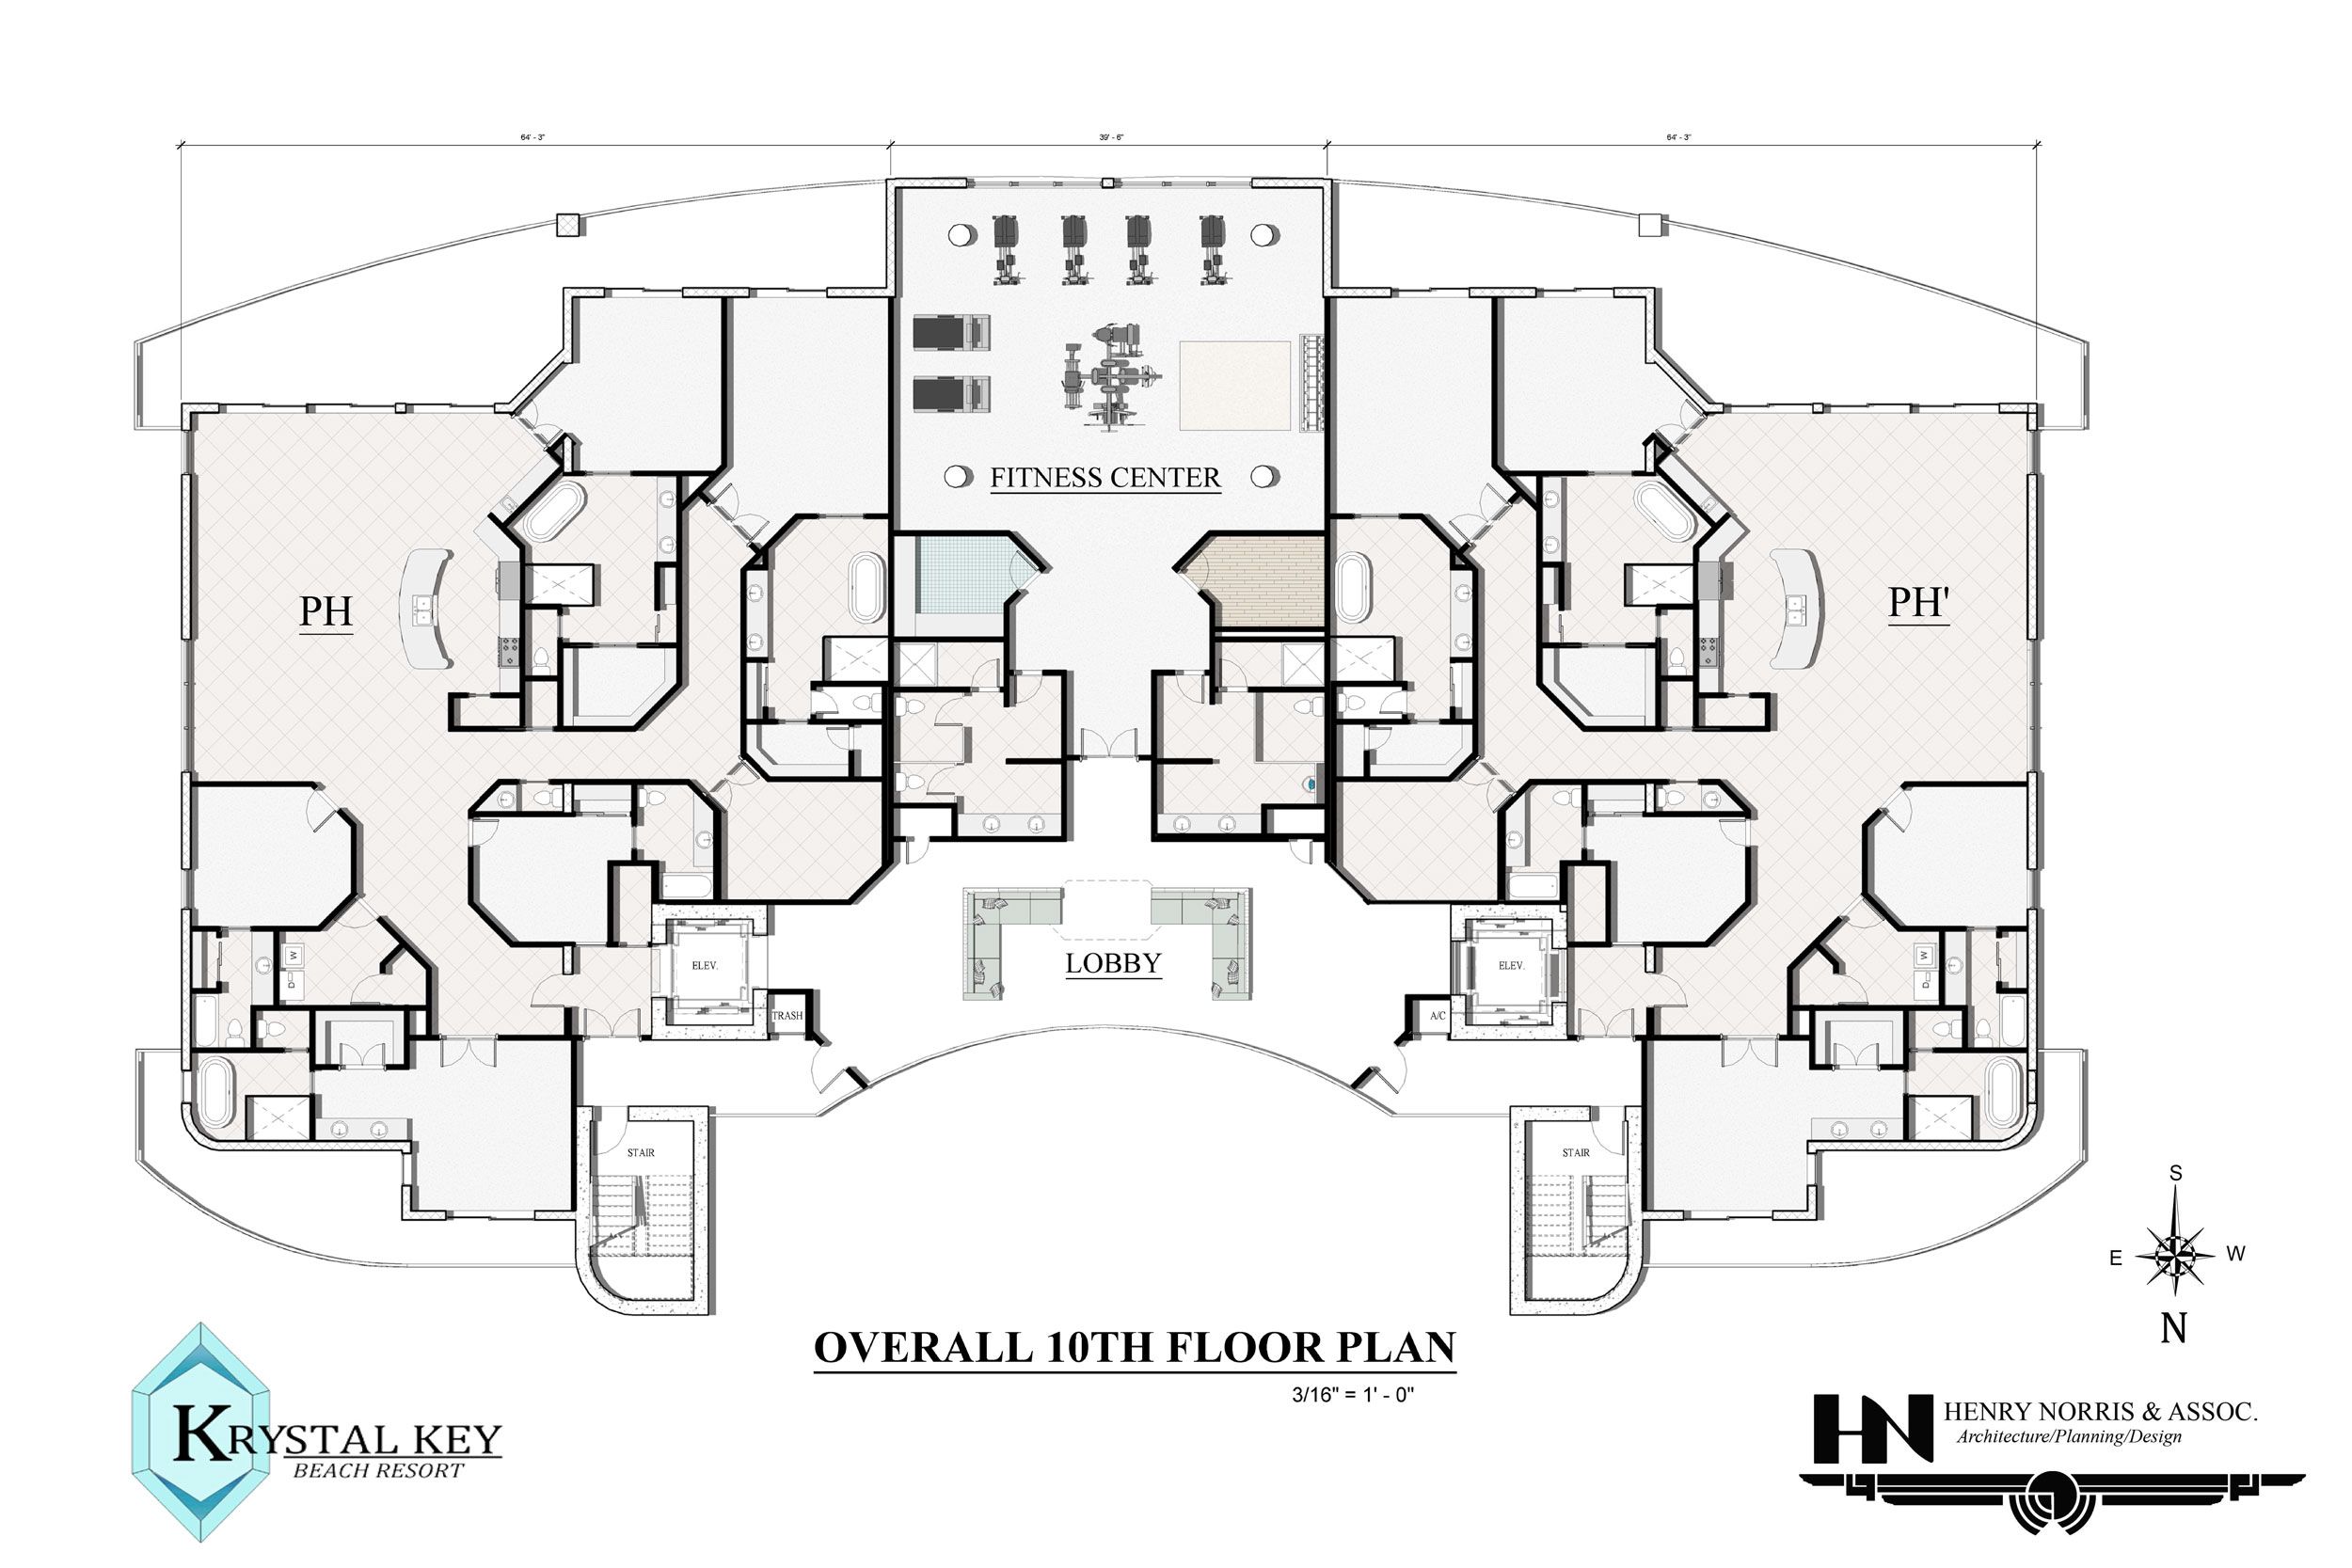 Overall 10th Floor Plan